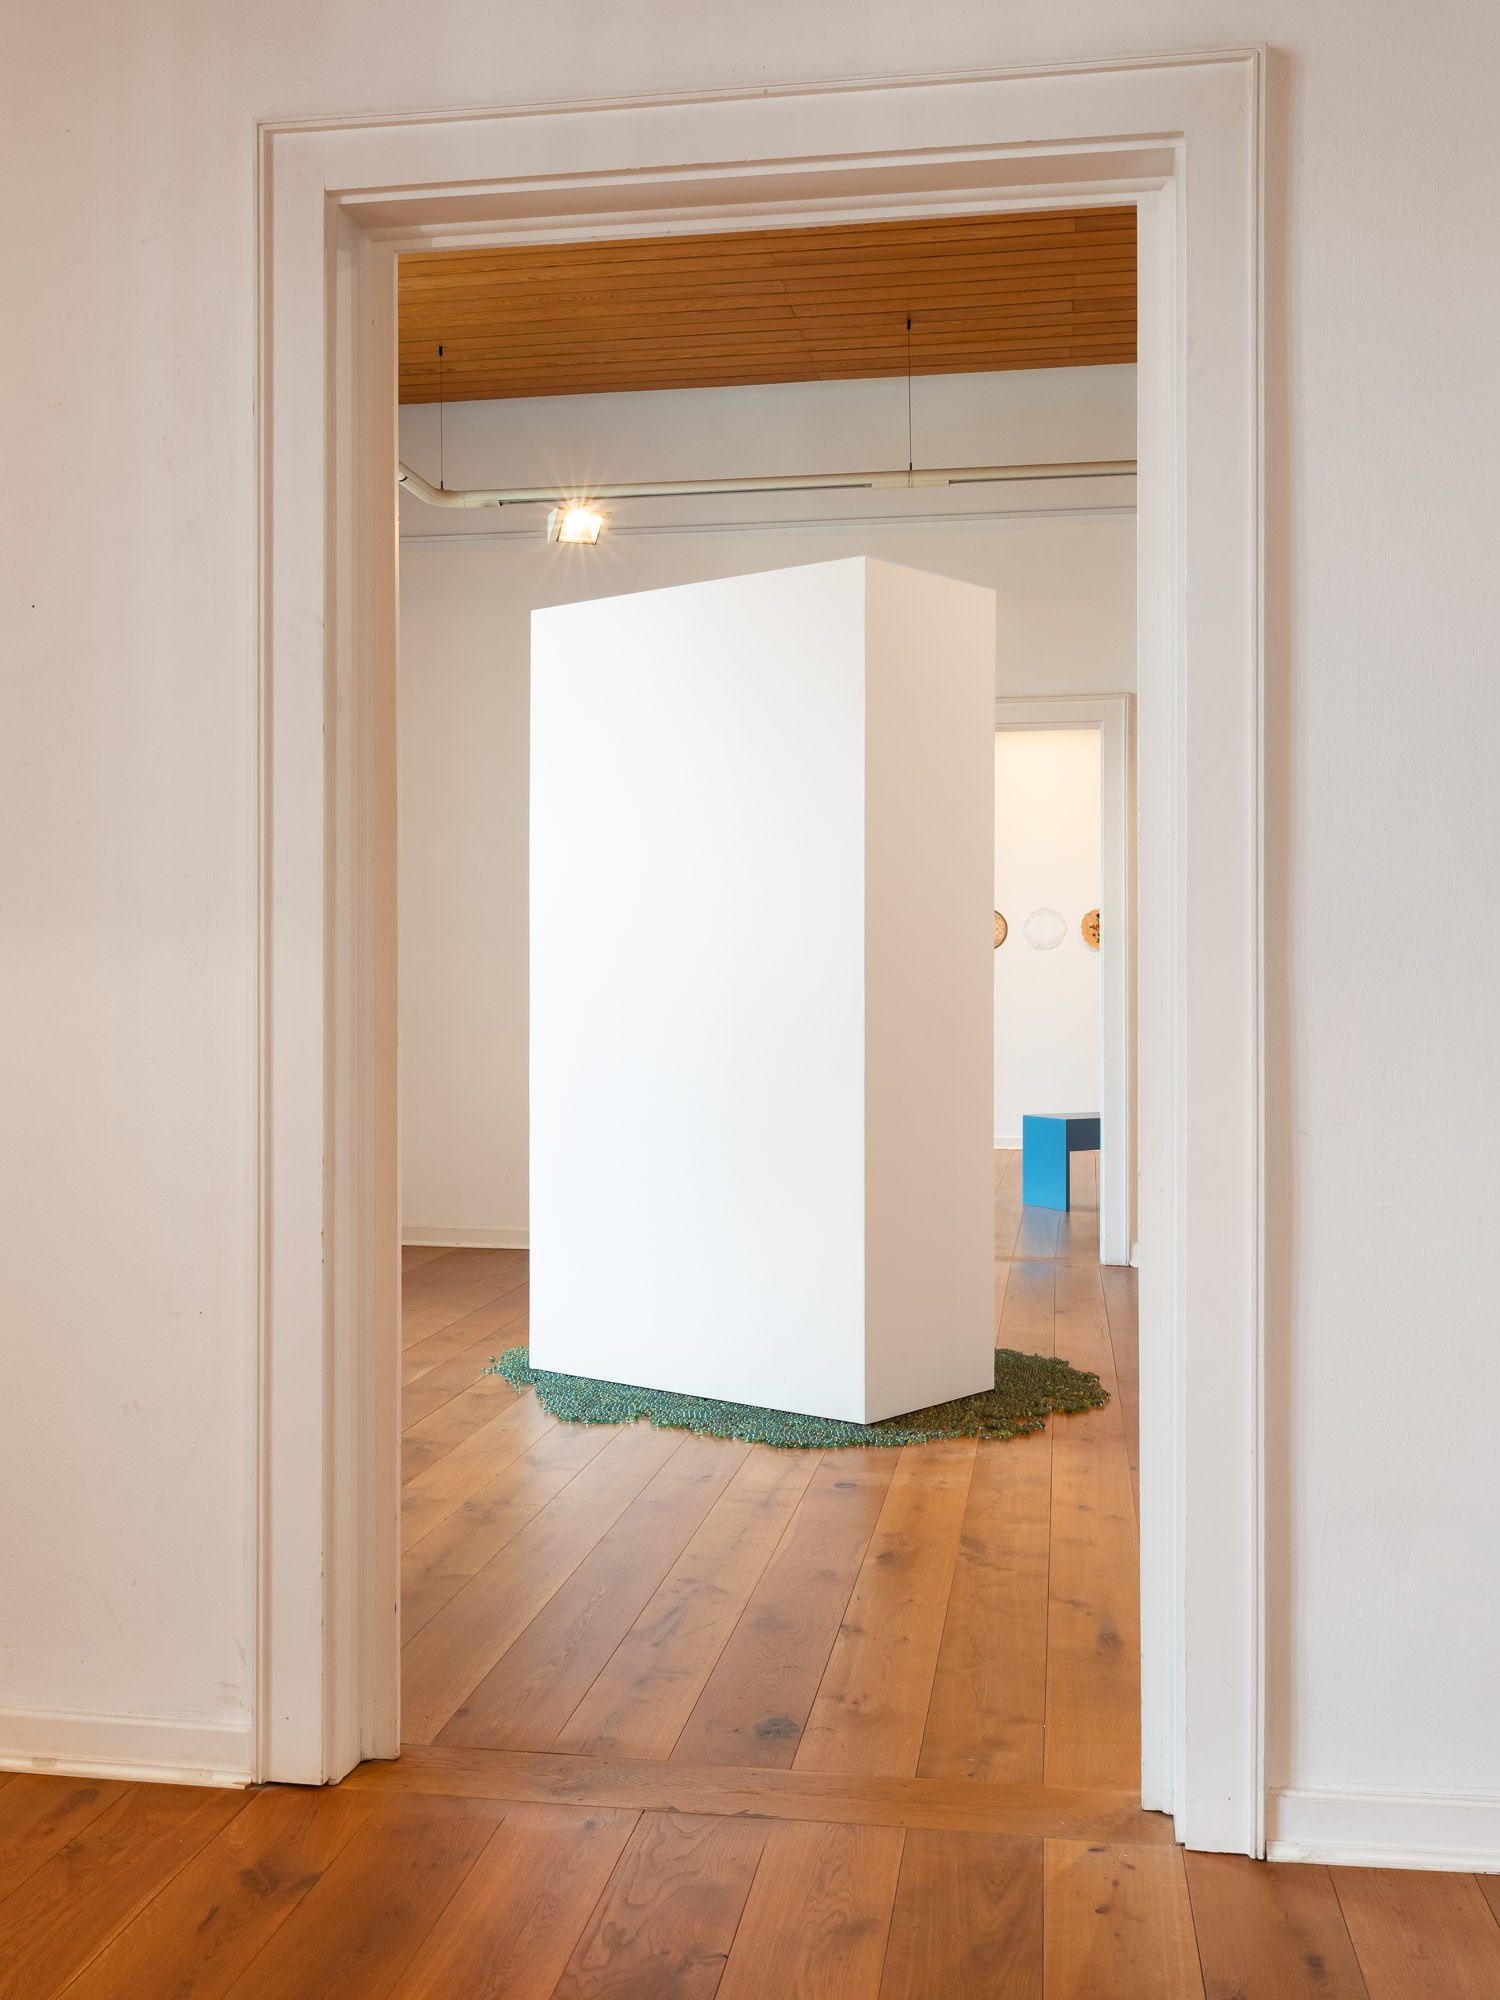 Maha Yammine, Memories of a canary (2022), exhibition view, Photo: Lucas Melzer 